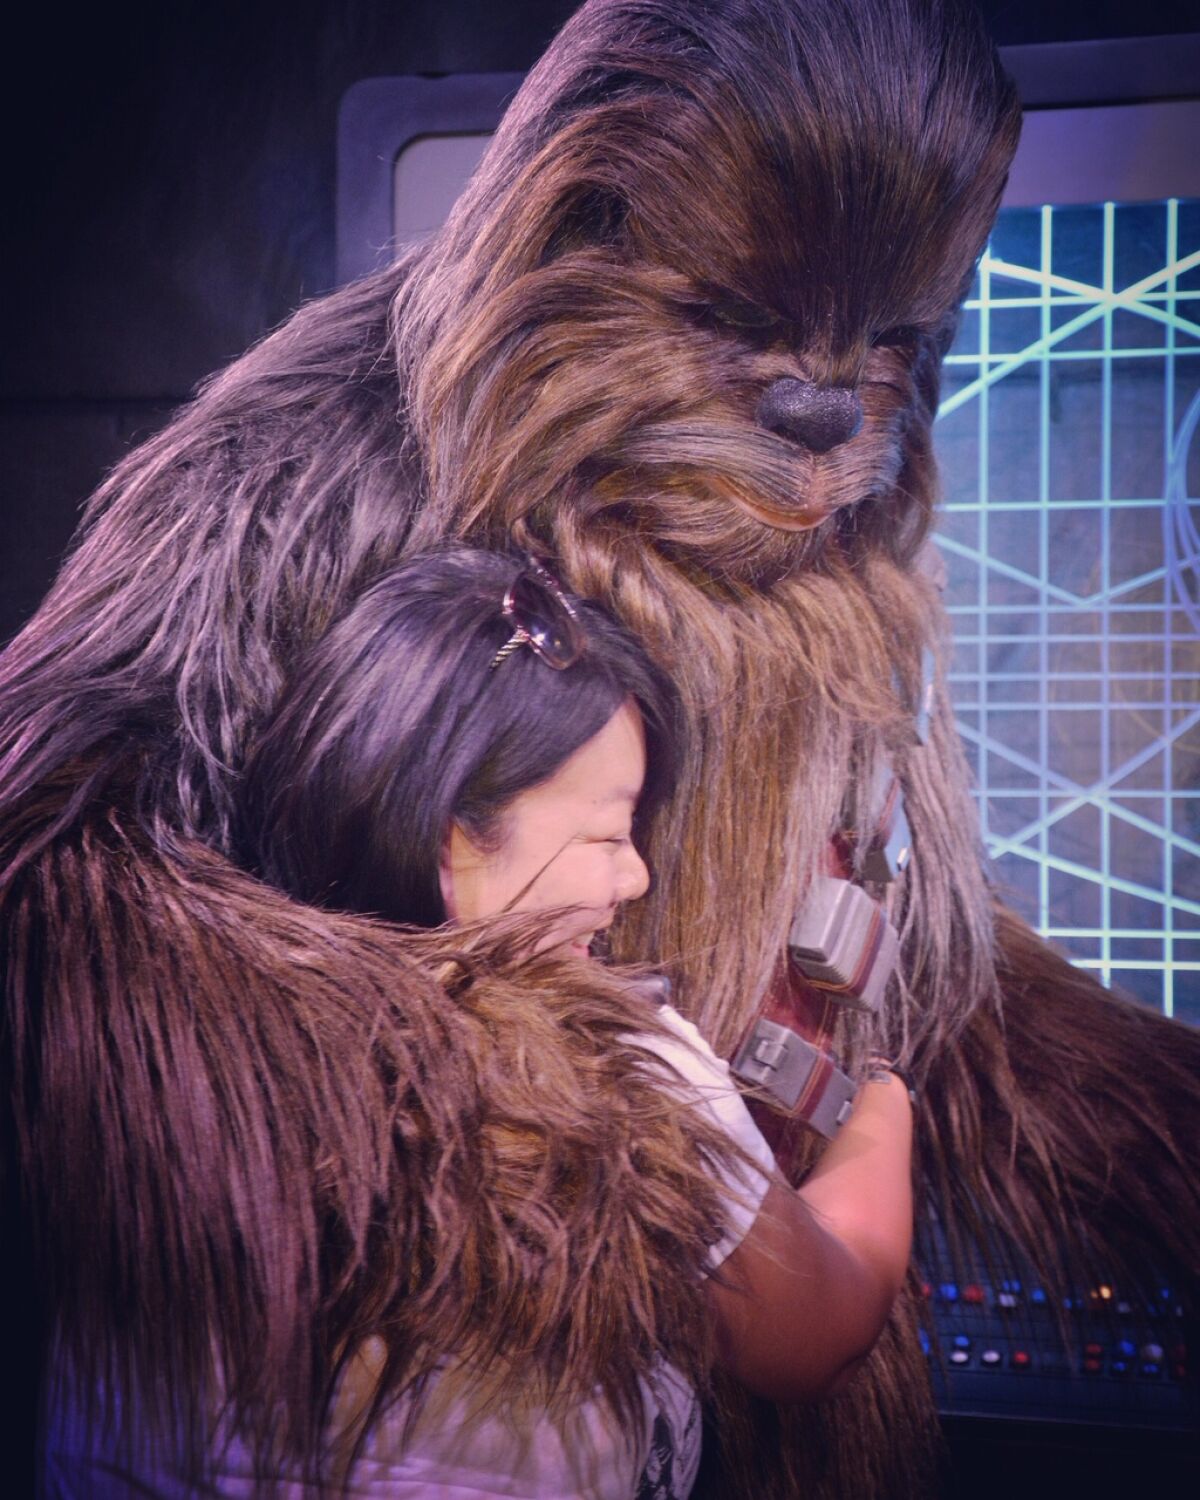 Cindy Hoang, 31 of Westmister, hugs Chewbacca at the Star Wars: Galaxy's Edge area of Disneyland.